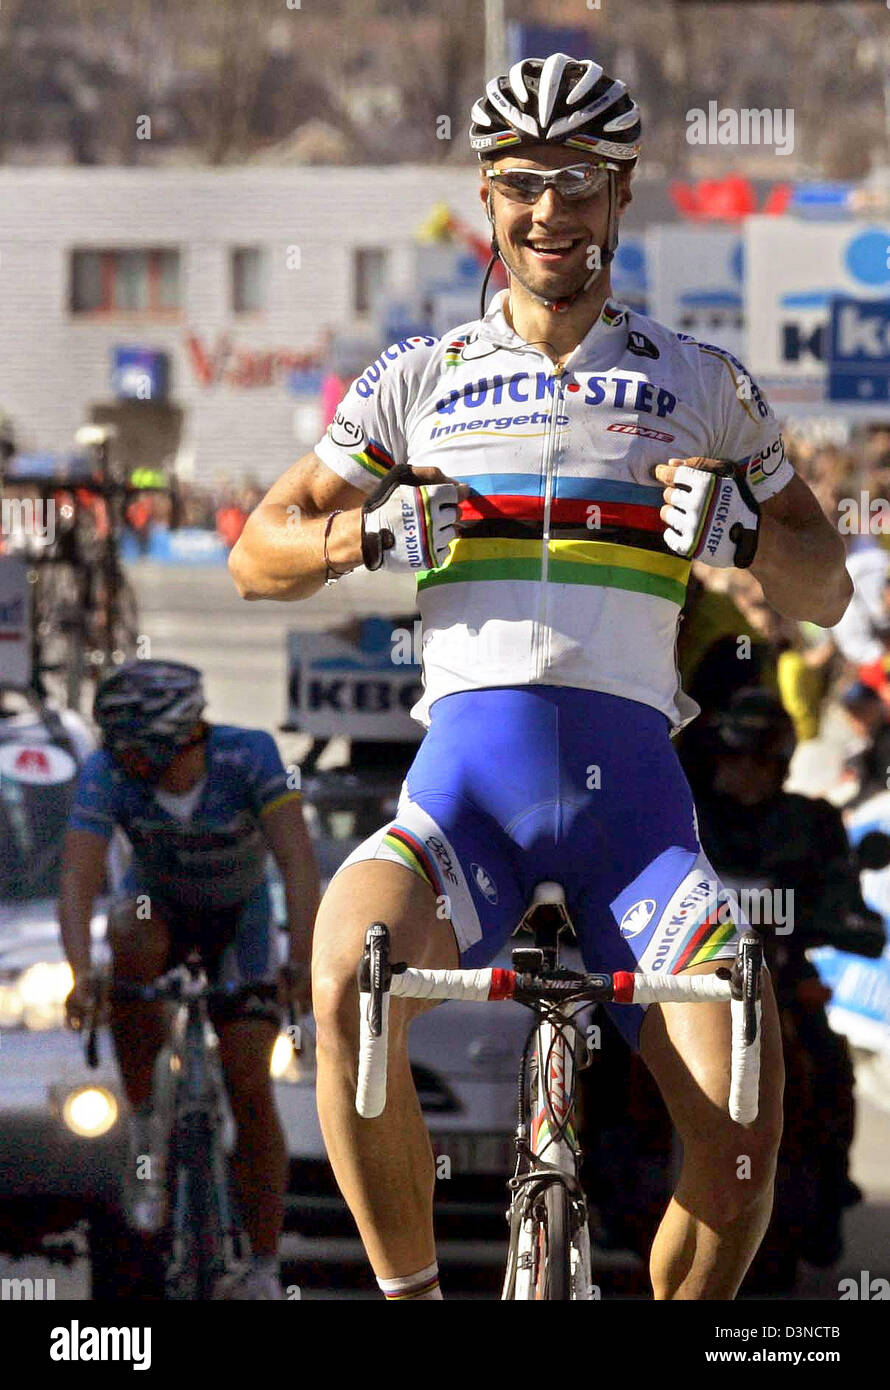 Belgian cyclist Tom Boonen of Team Quickstep celebrates after winning the ProTour Flanders cycling race in Meerbeke, Belgium, 02 April 2006. The course covered a distance of 258 kilometres from the town of Bruges to Meerbeke. Photo: Bernd Thissen Stock Photo